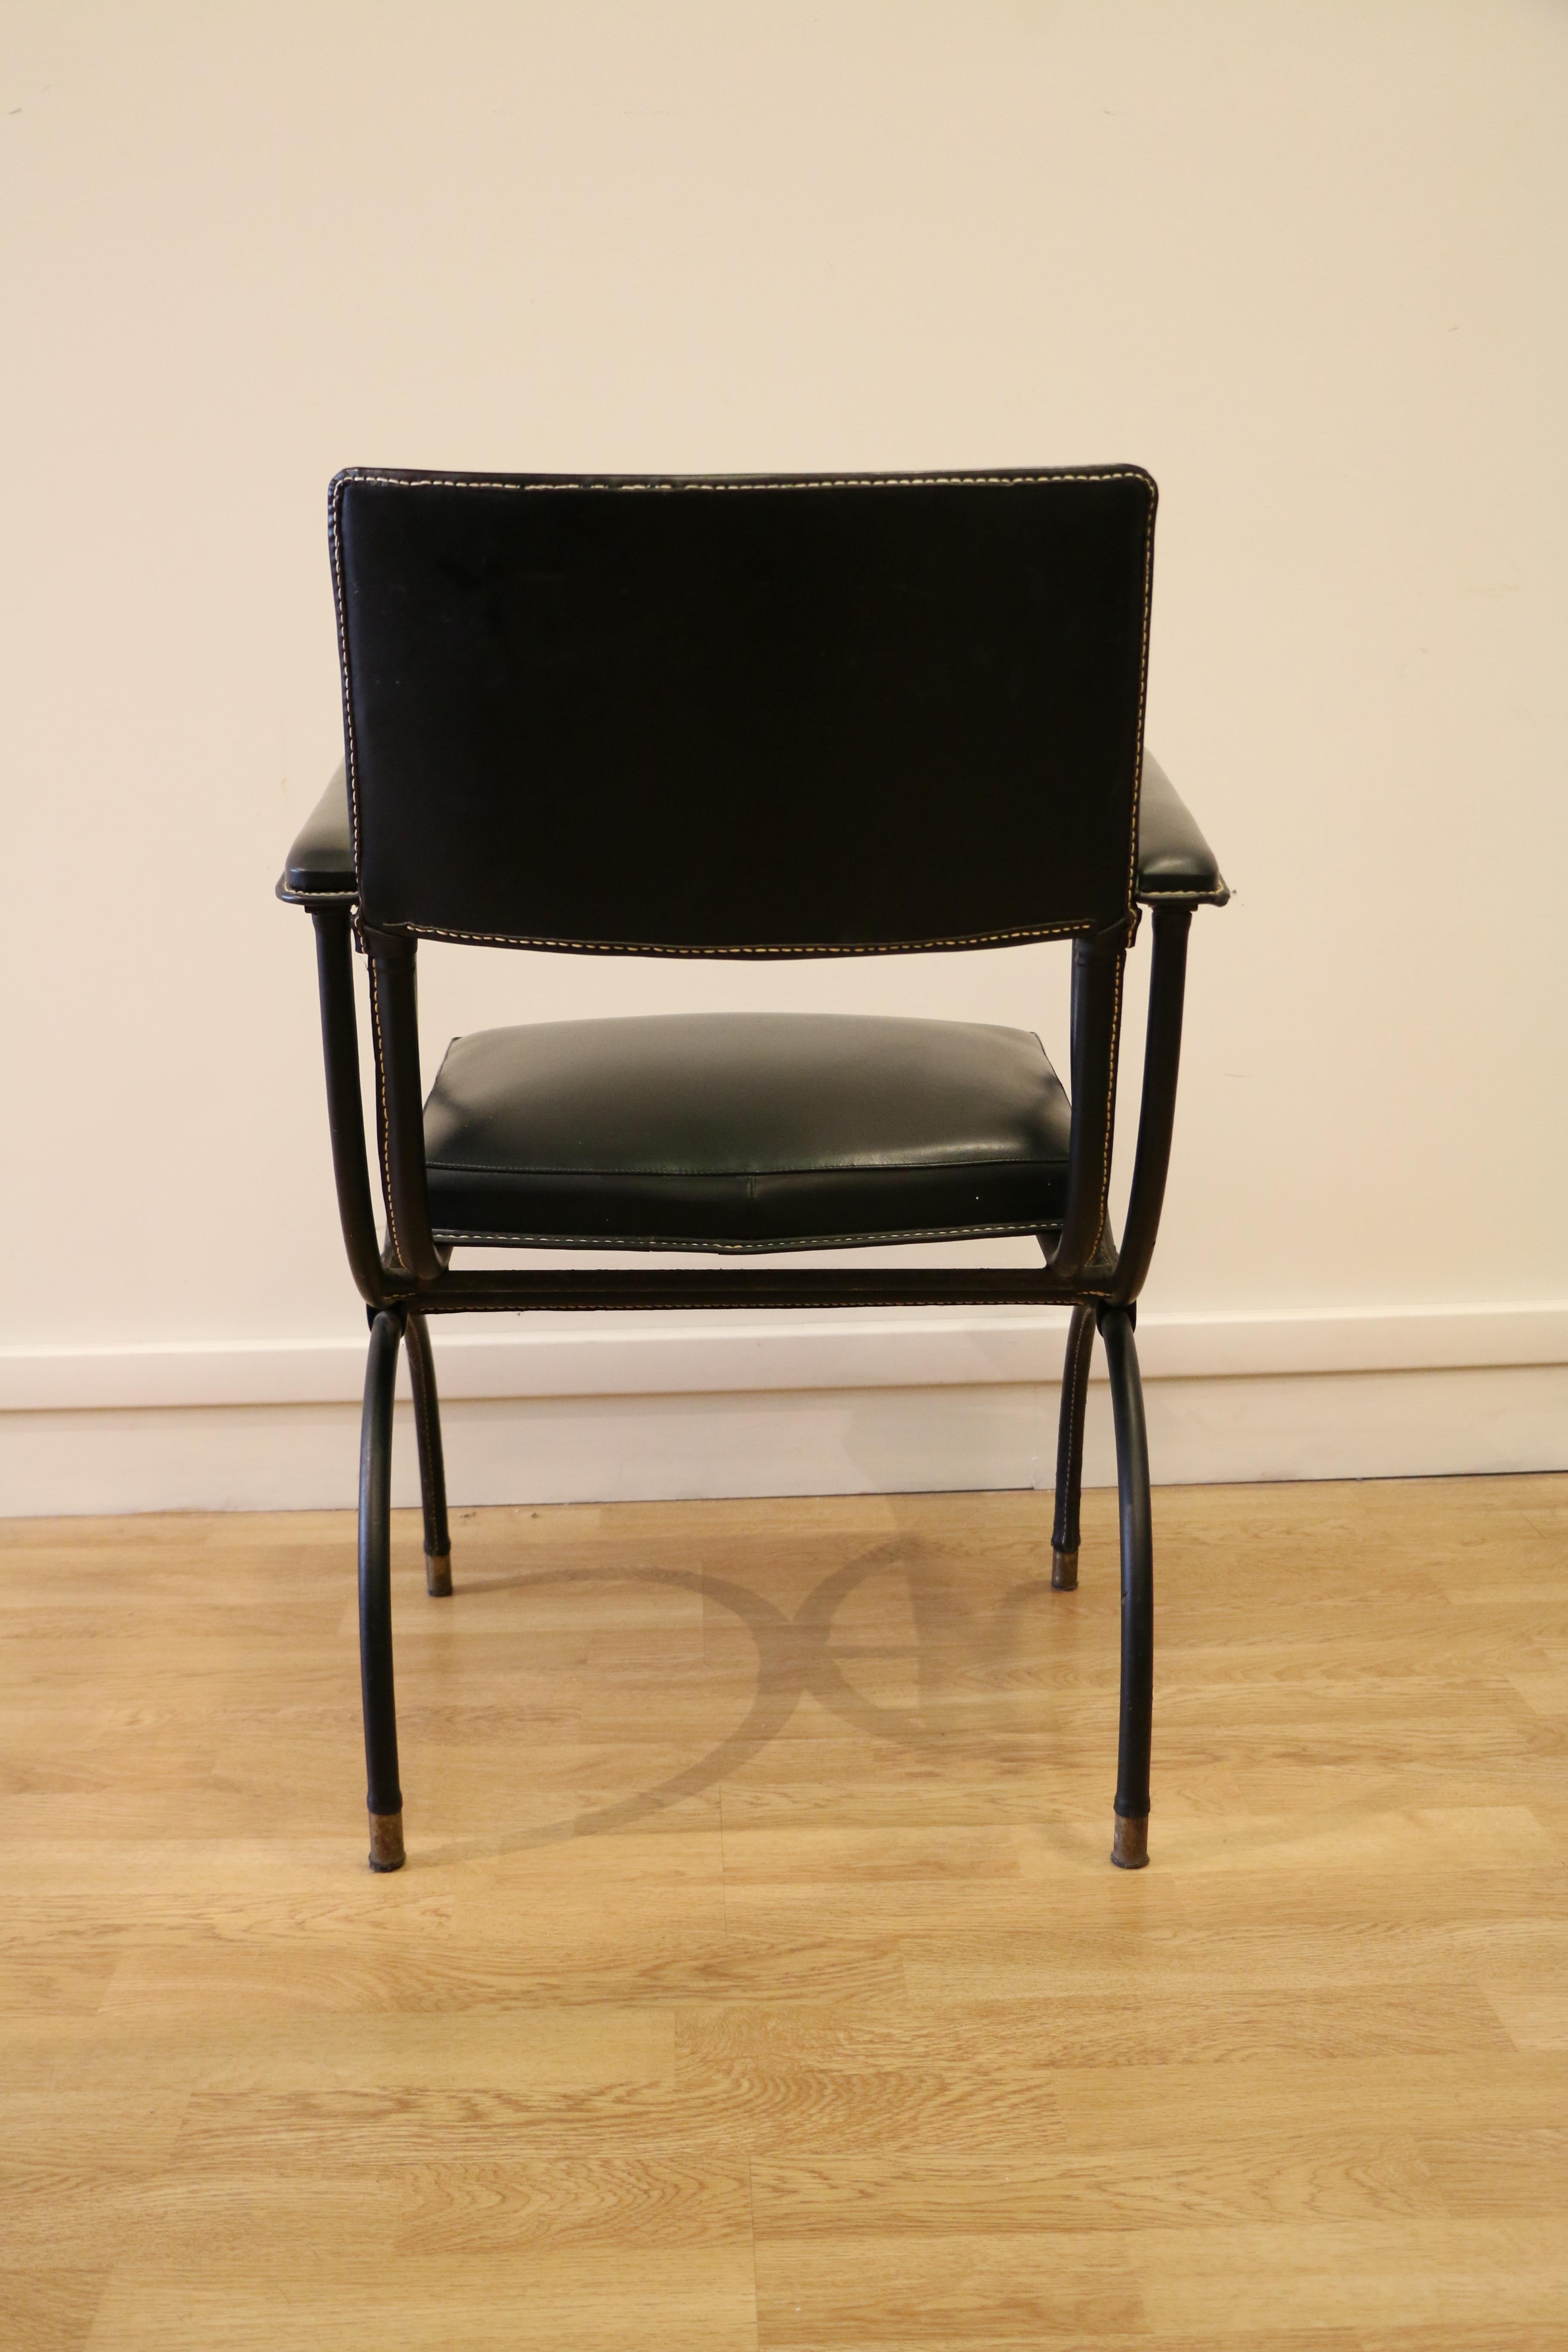 Rare Desk and Armchair by Jacques Adnet, Stitched Leather and Skaï, 1950s For Sale 5